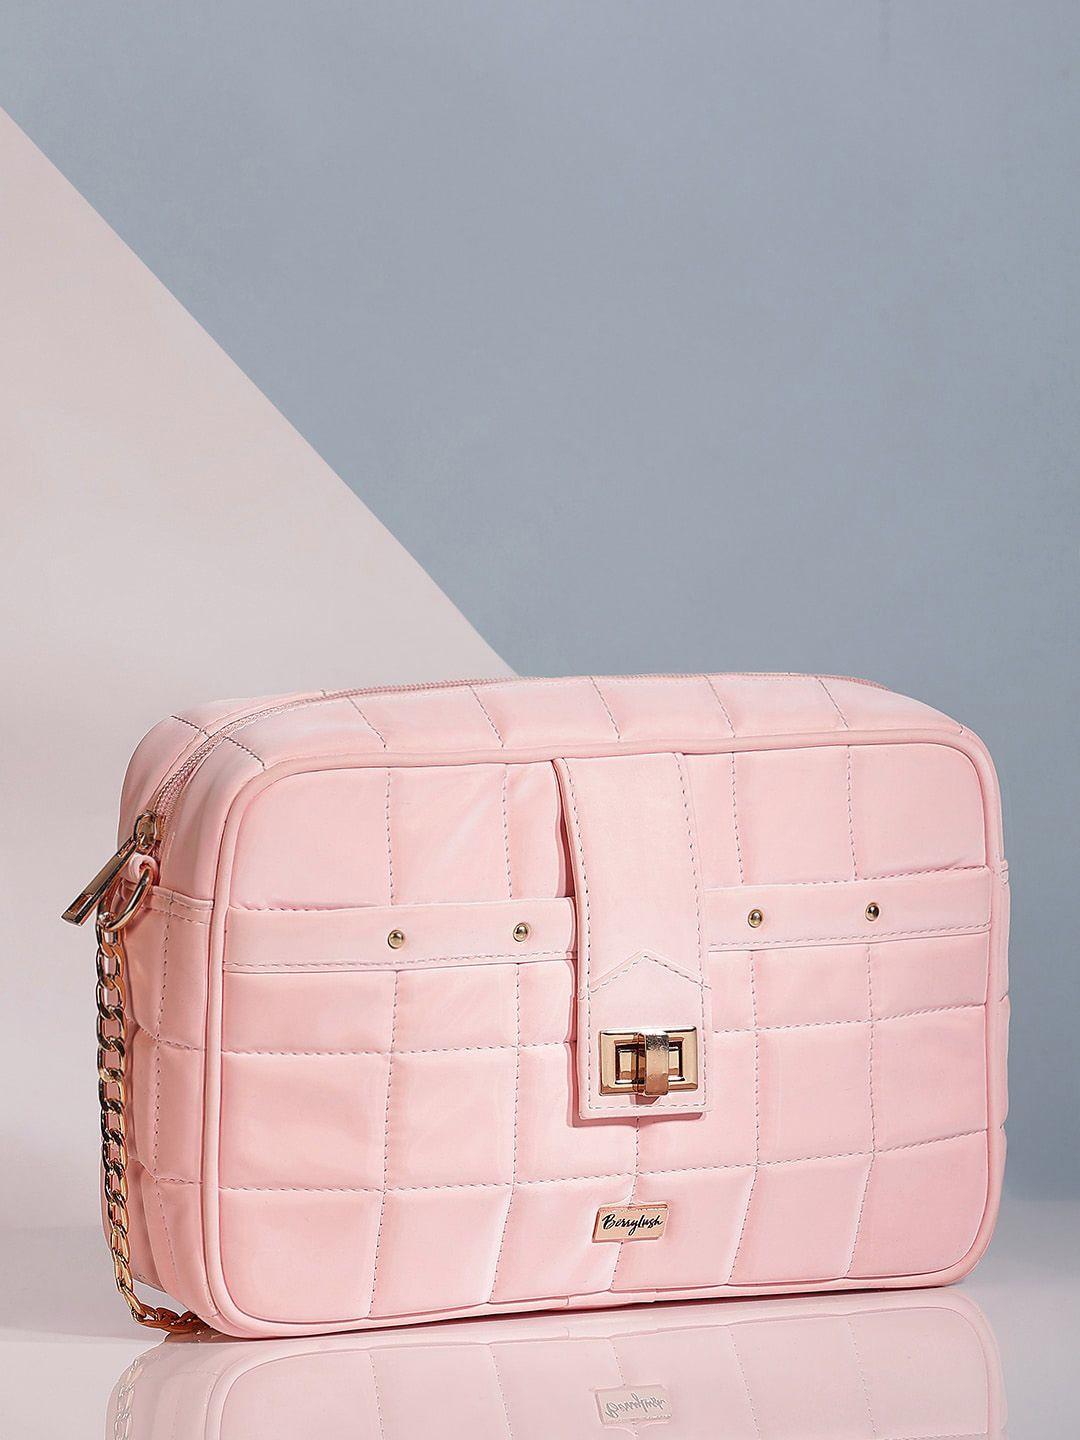 berrylush-textured-structured-handheld-bag-with-quilted